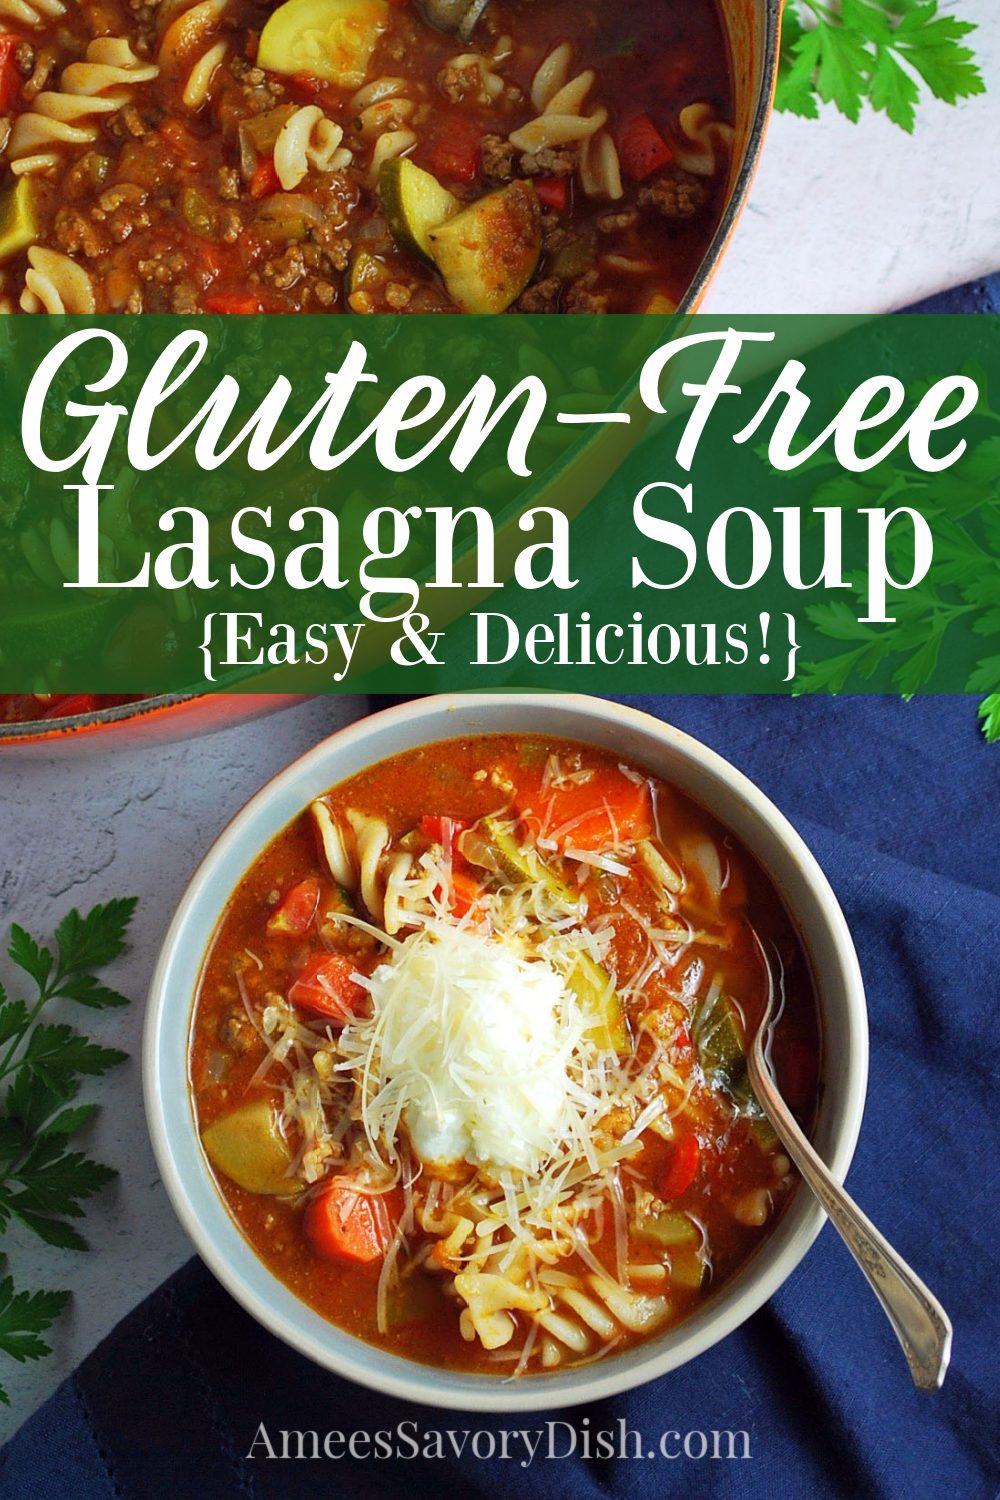 A simple and delicious recipe for gluten-free lasagna soup made with lean ground beef, Italian sausage, fresh vegetables, and gluten-free pasta. #lasagna #lasagnasoup #souprecipe #italianfood #easyitalian via @Ameessavorydish